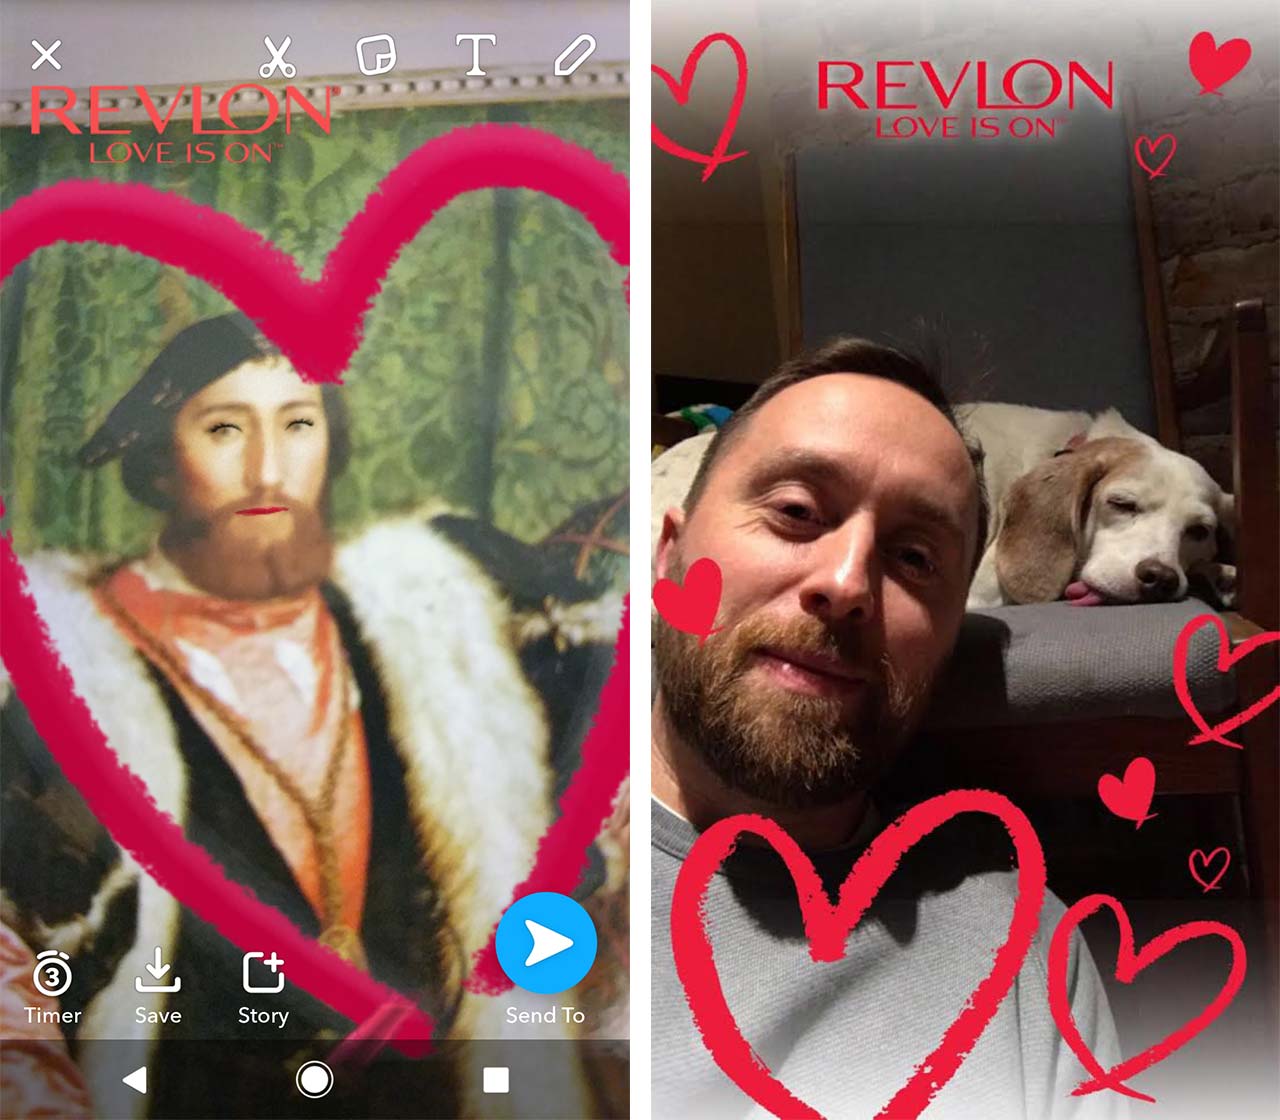 snapchat revlon valentines lens of medieval man with lipstick and geofilter of man and sleeping dog - snapchat makeup lens